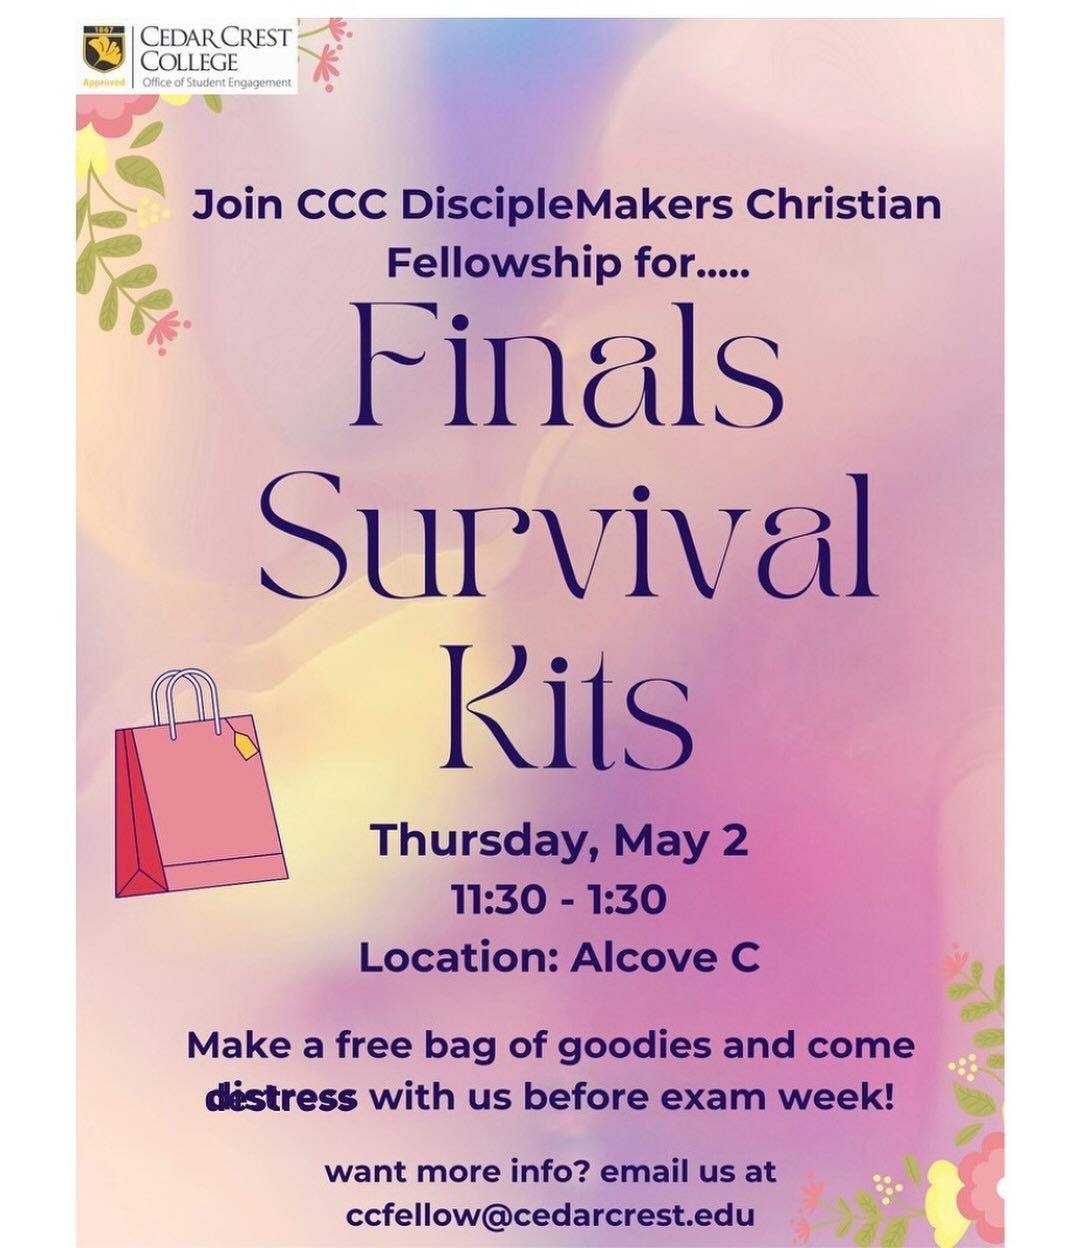 Join us ONE WEEK from tomorrow as we take a much-needed break and grab some bags of goodies together. Everybody is welcome, so bring a friend along! See you Thursday, May 2 in Alcove C (behind Canova).